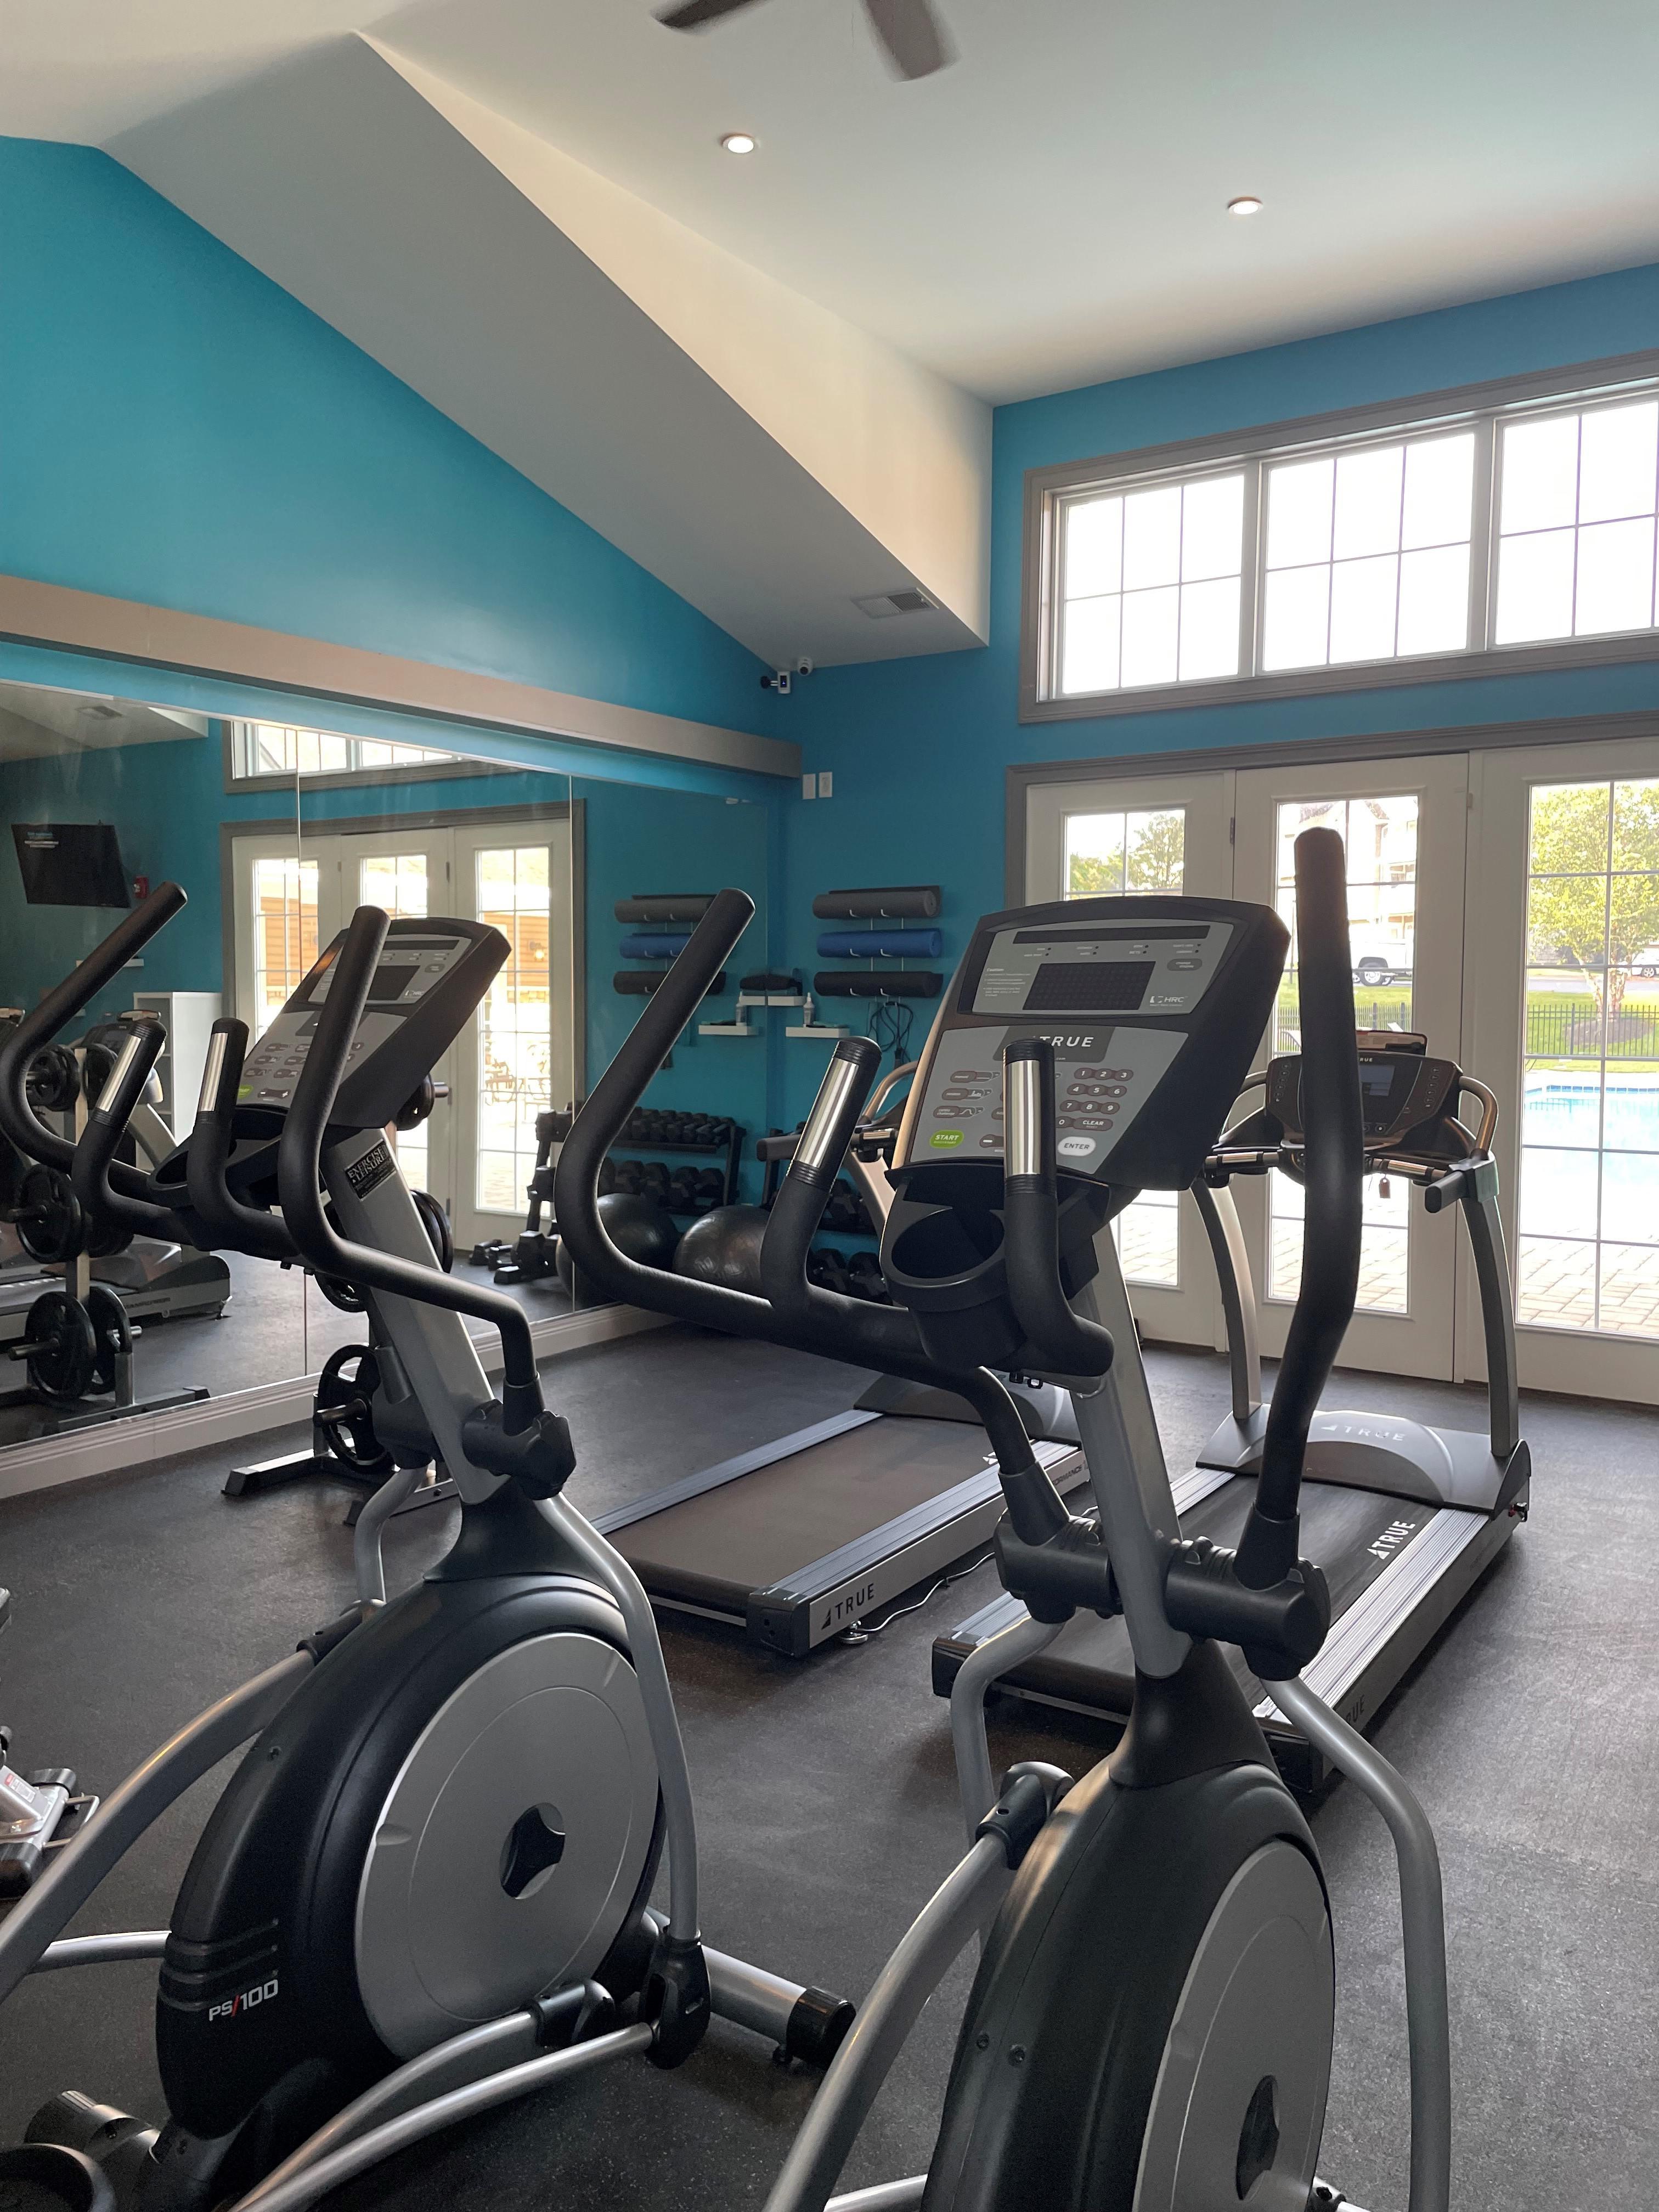 Water's Bend Apartment Fitness Center